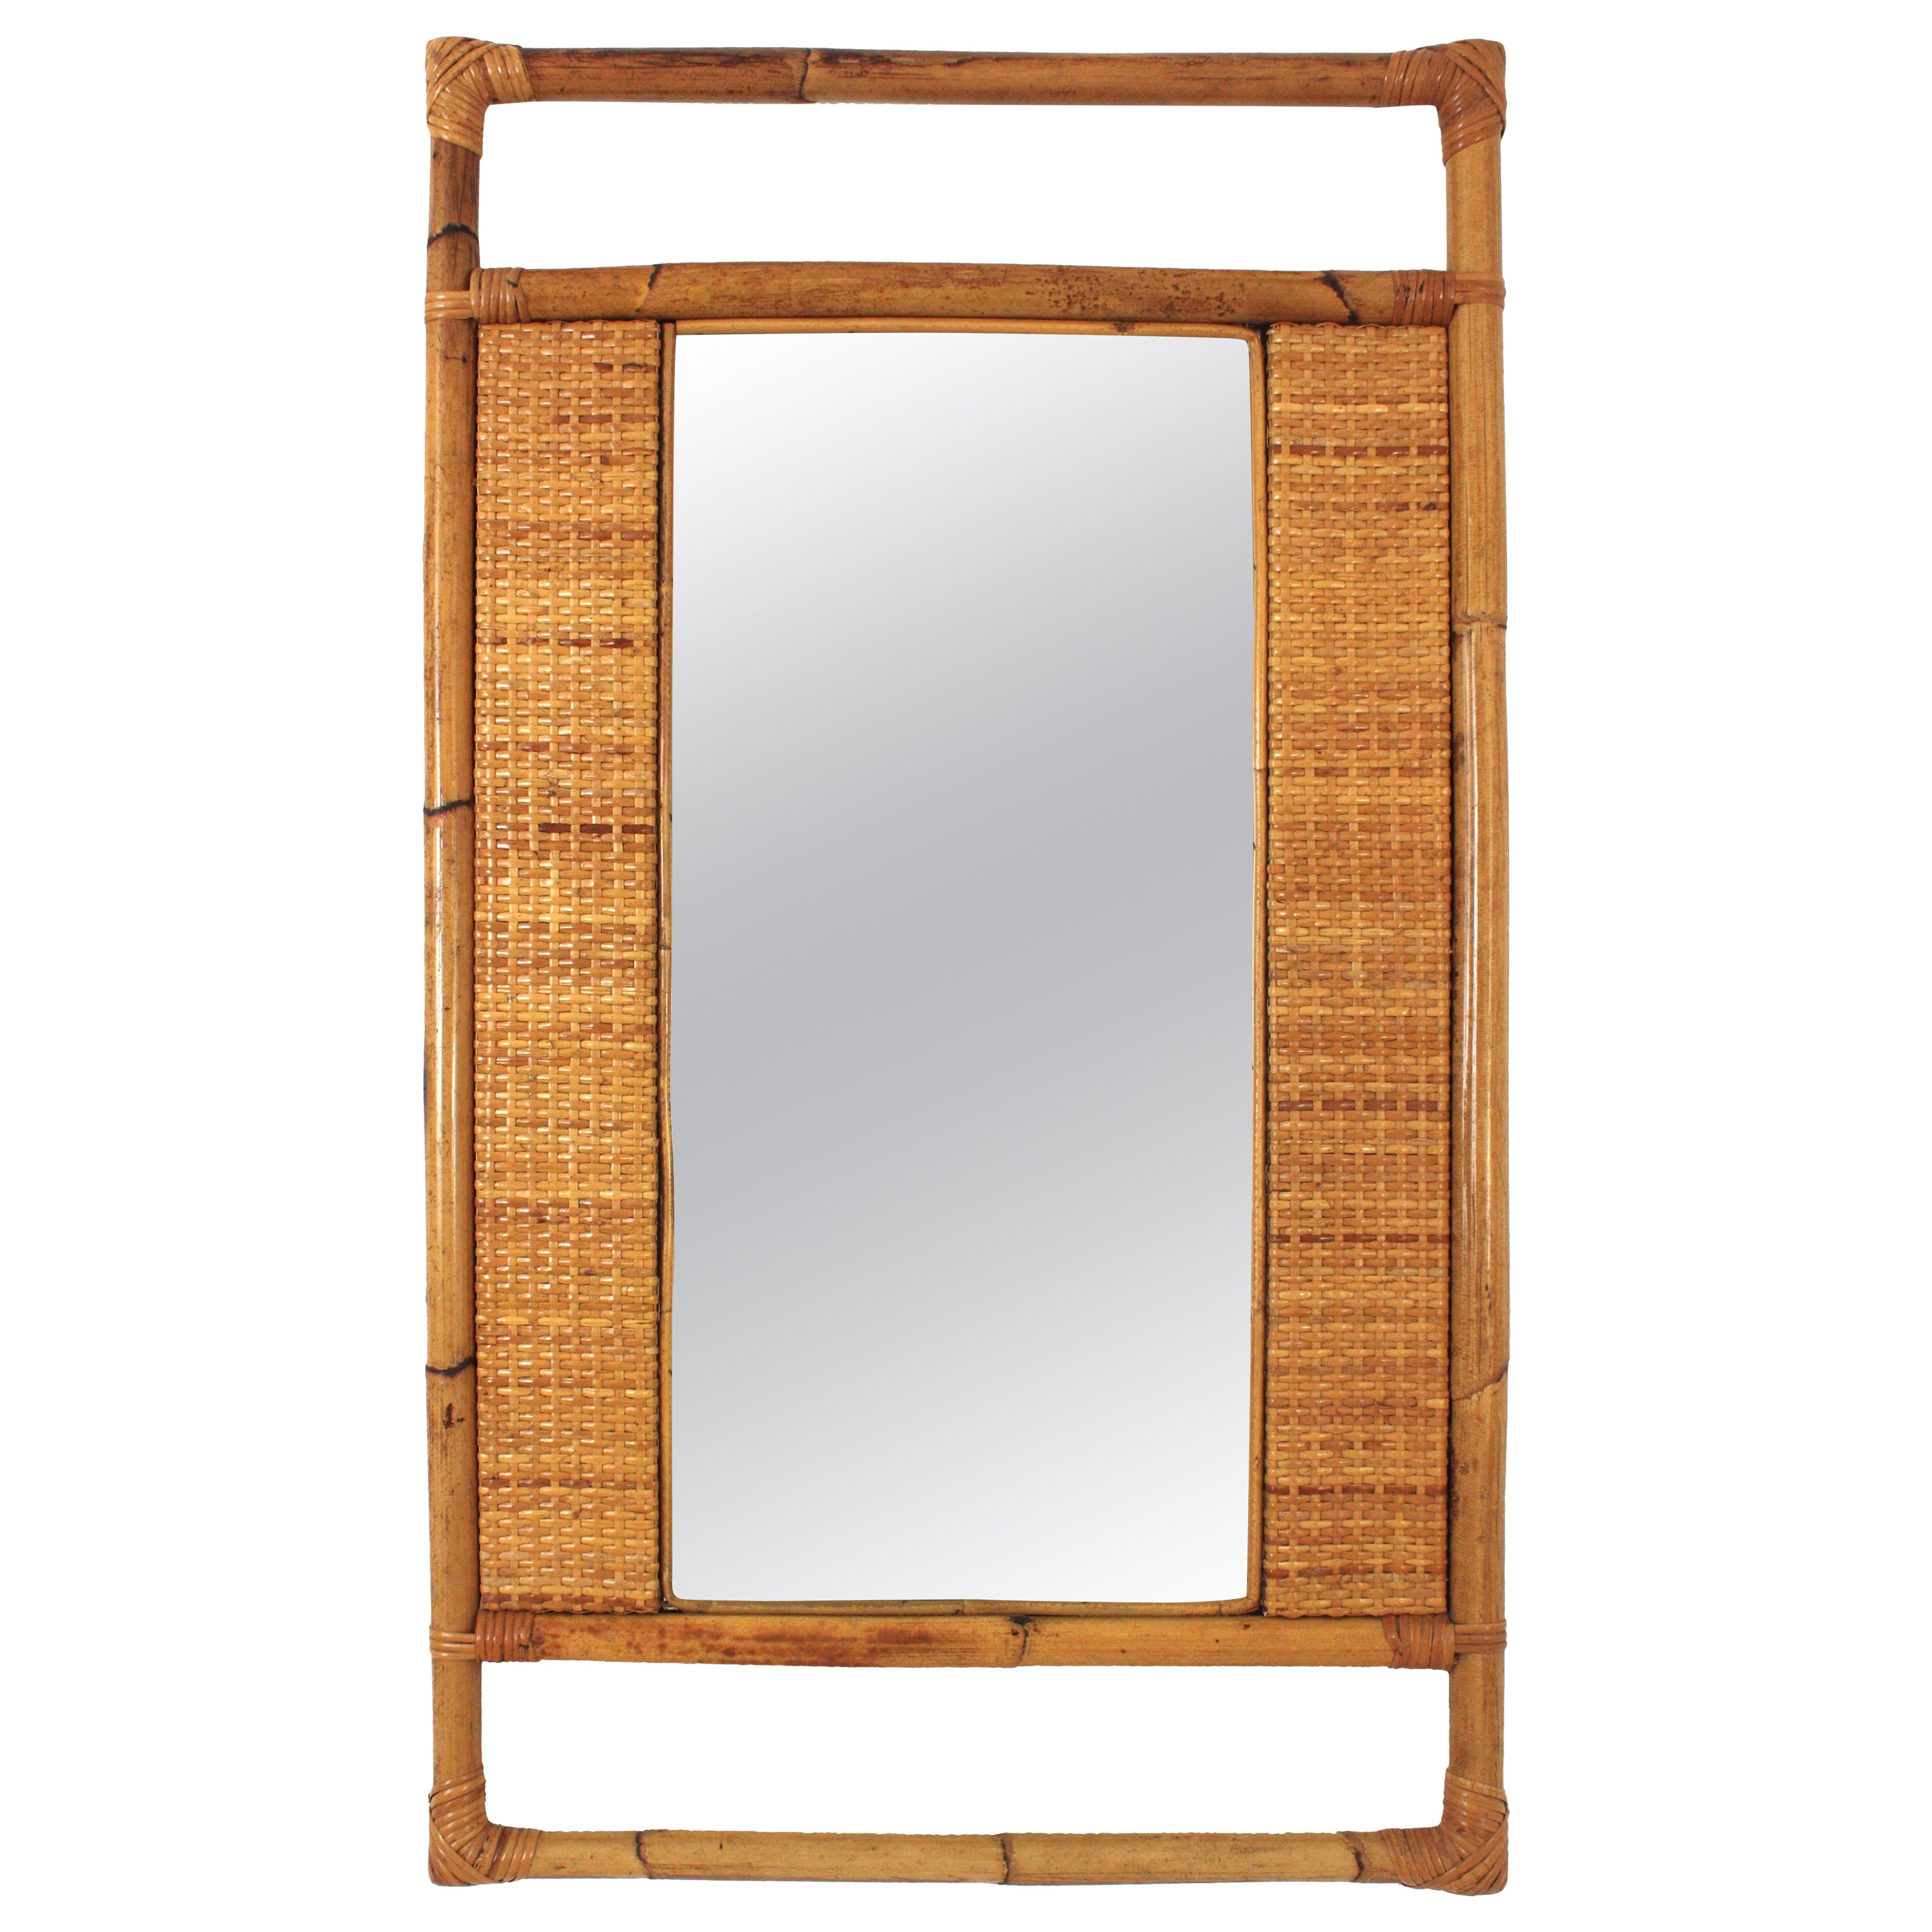 Spanish Rectangular Rattan Wall Mirror with Geometric Woven Frame For Sale